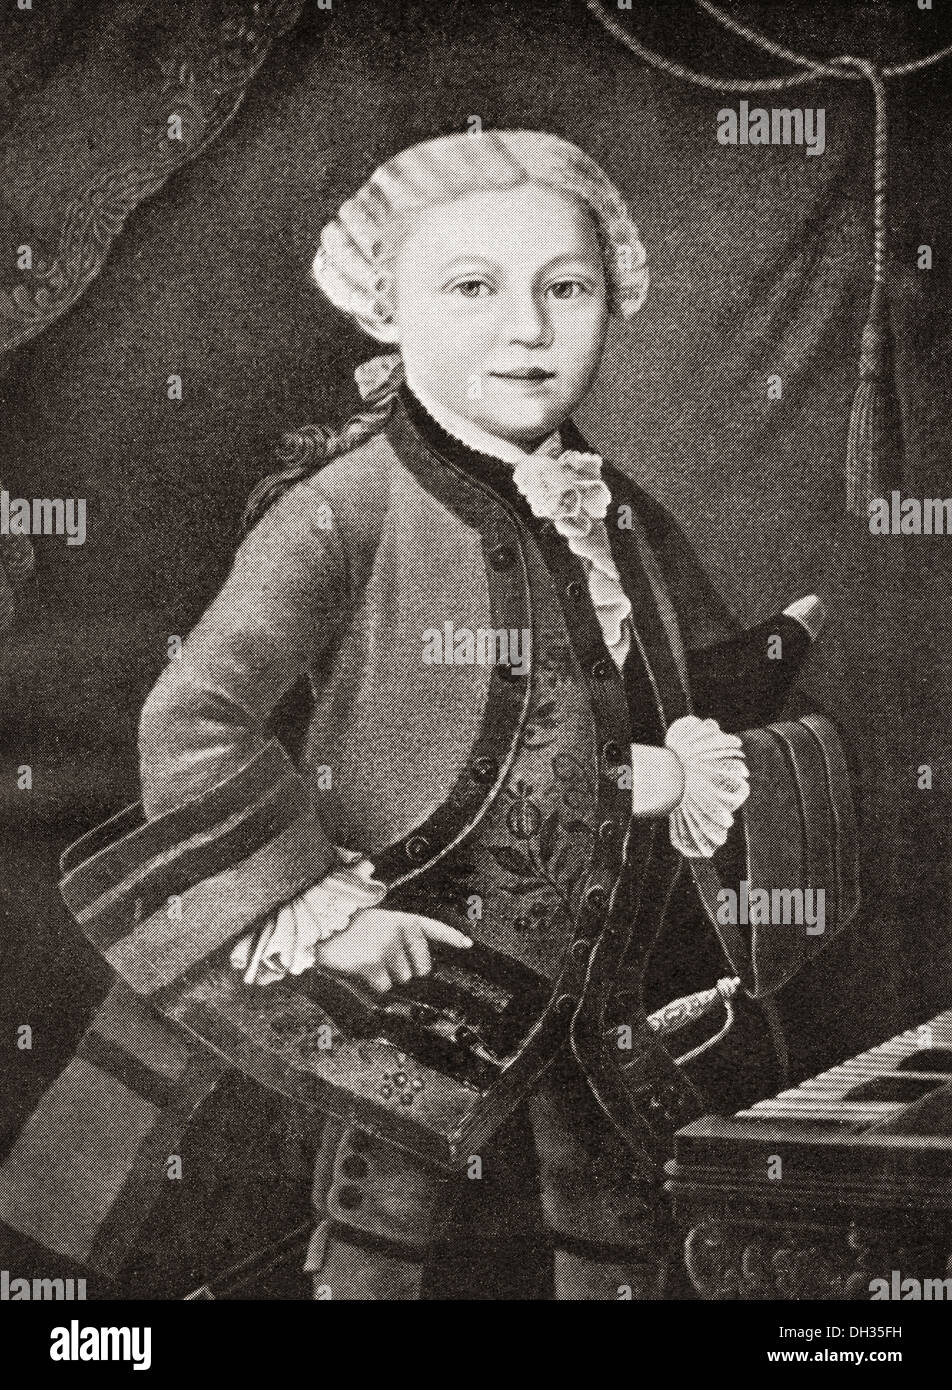 Wolfgang Amadeus Mozart, 1756 - 1791, as a child. Austrian composer and musician. Stock Photo